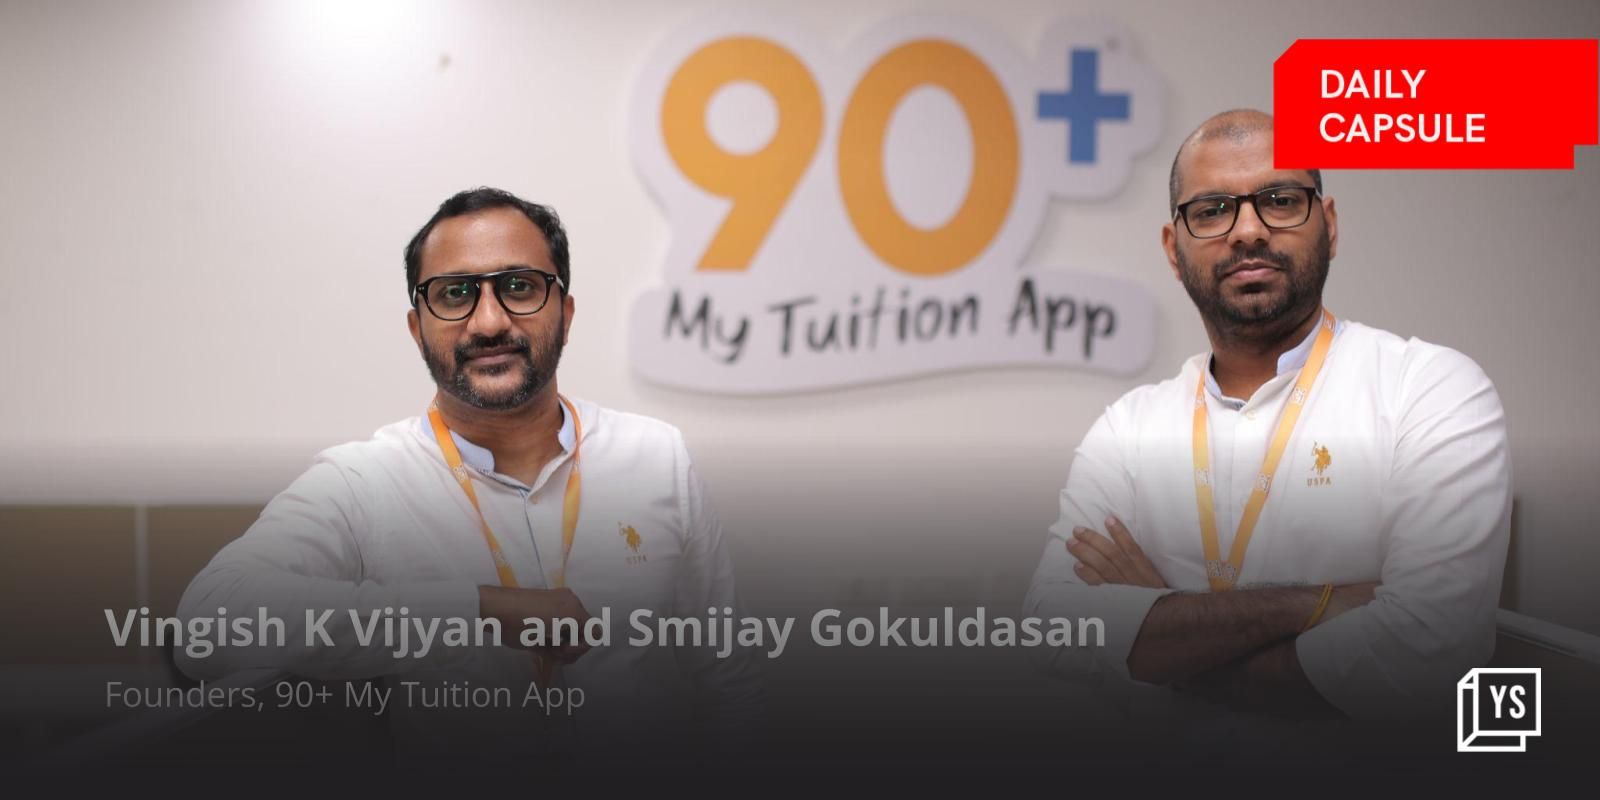 E-tutoring NRI students in the Gulf; From Instagram to Shark Tank India